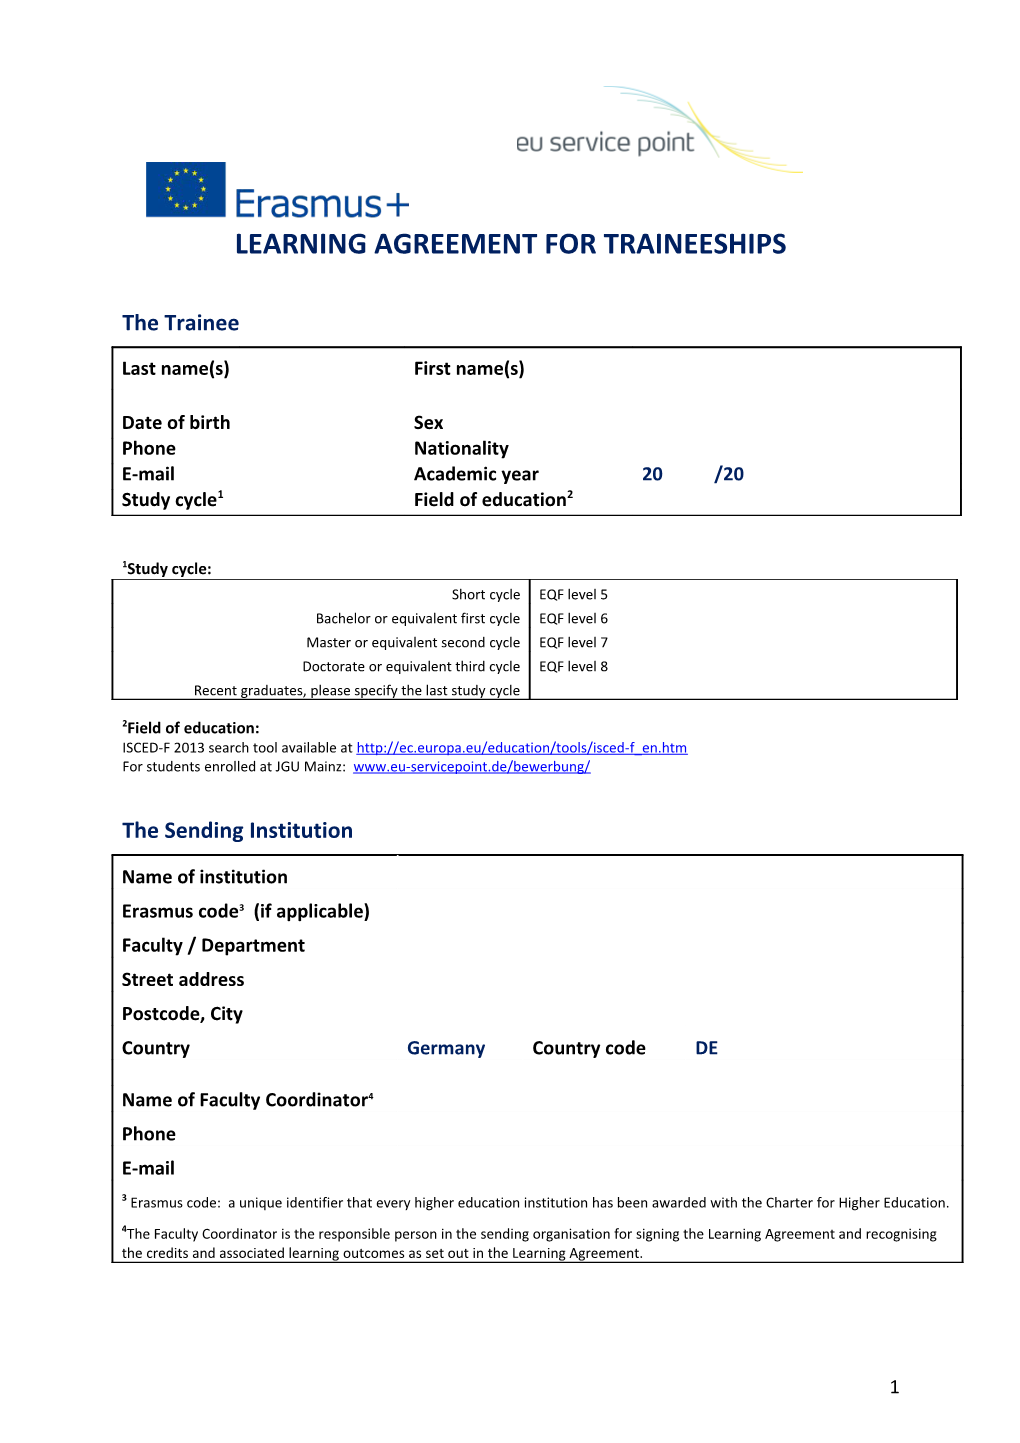 Learning Agreement for Traineeships s2